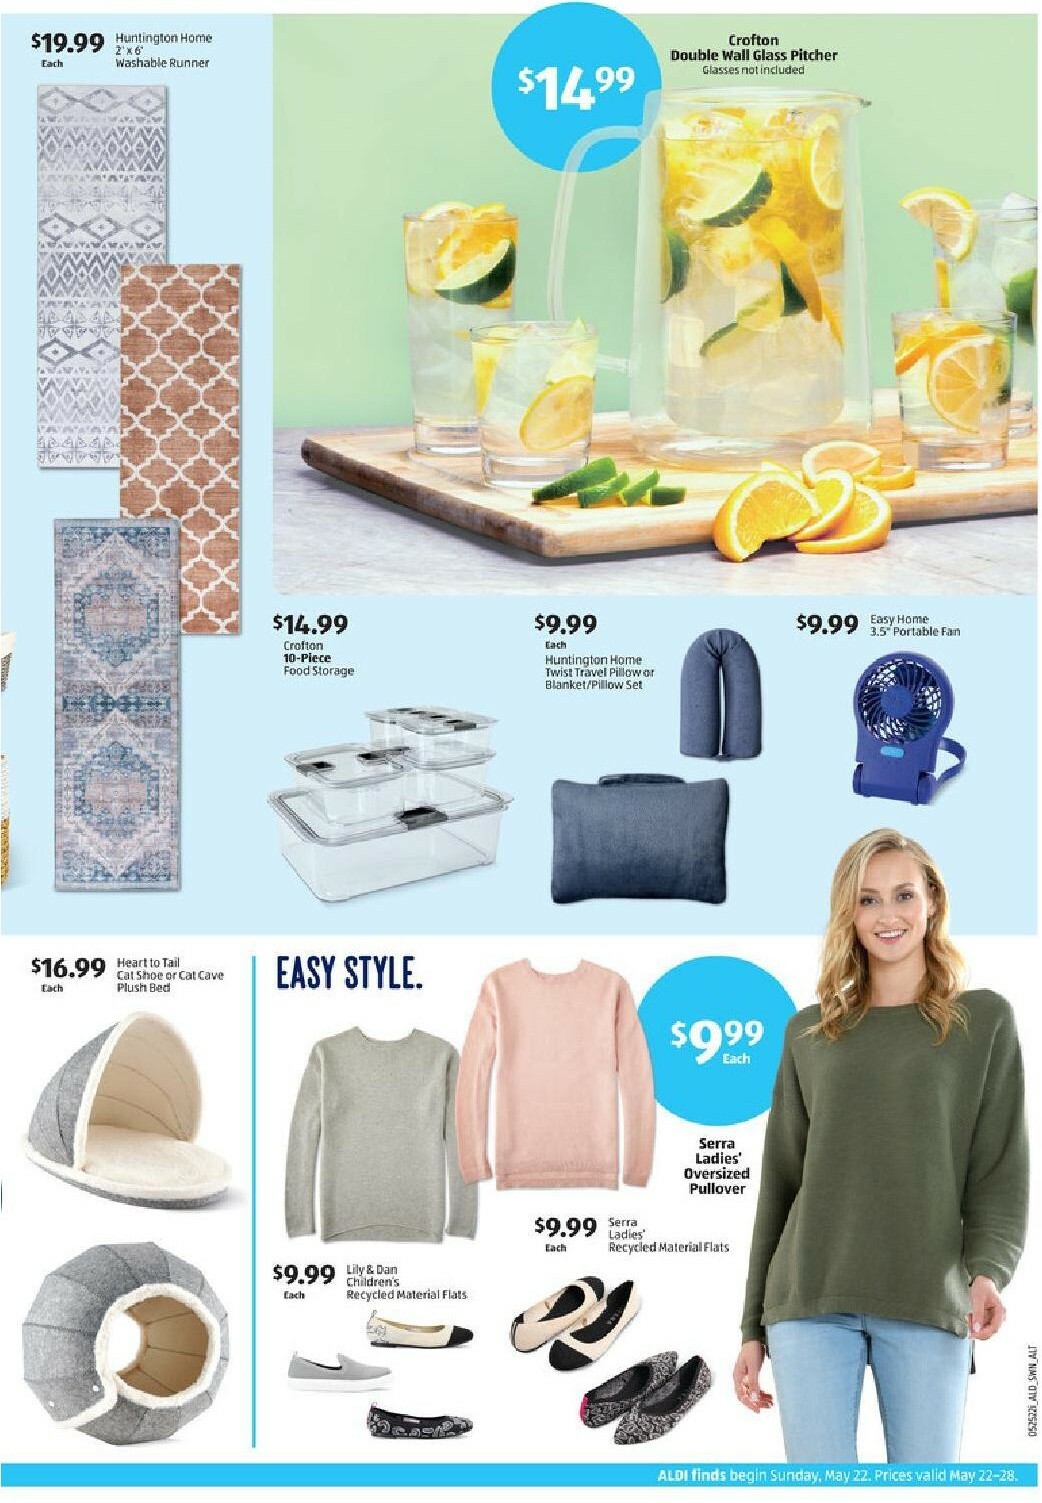 ALDI Weekly Ad from May 22